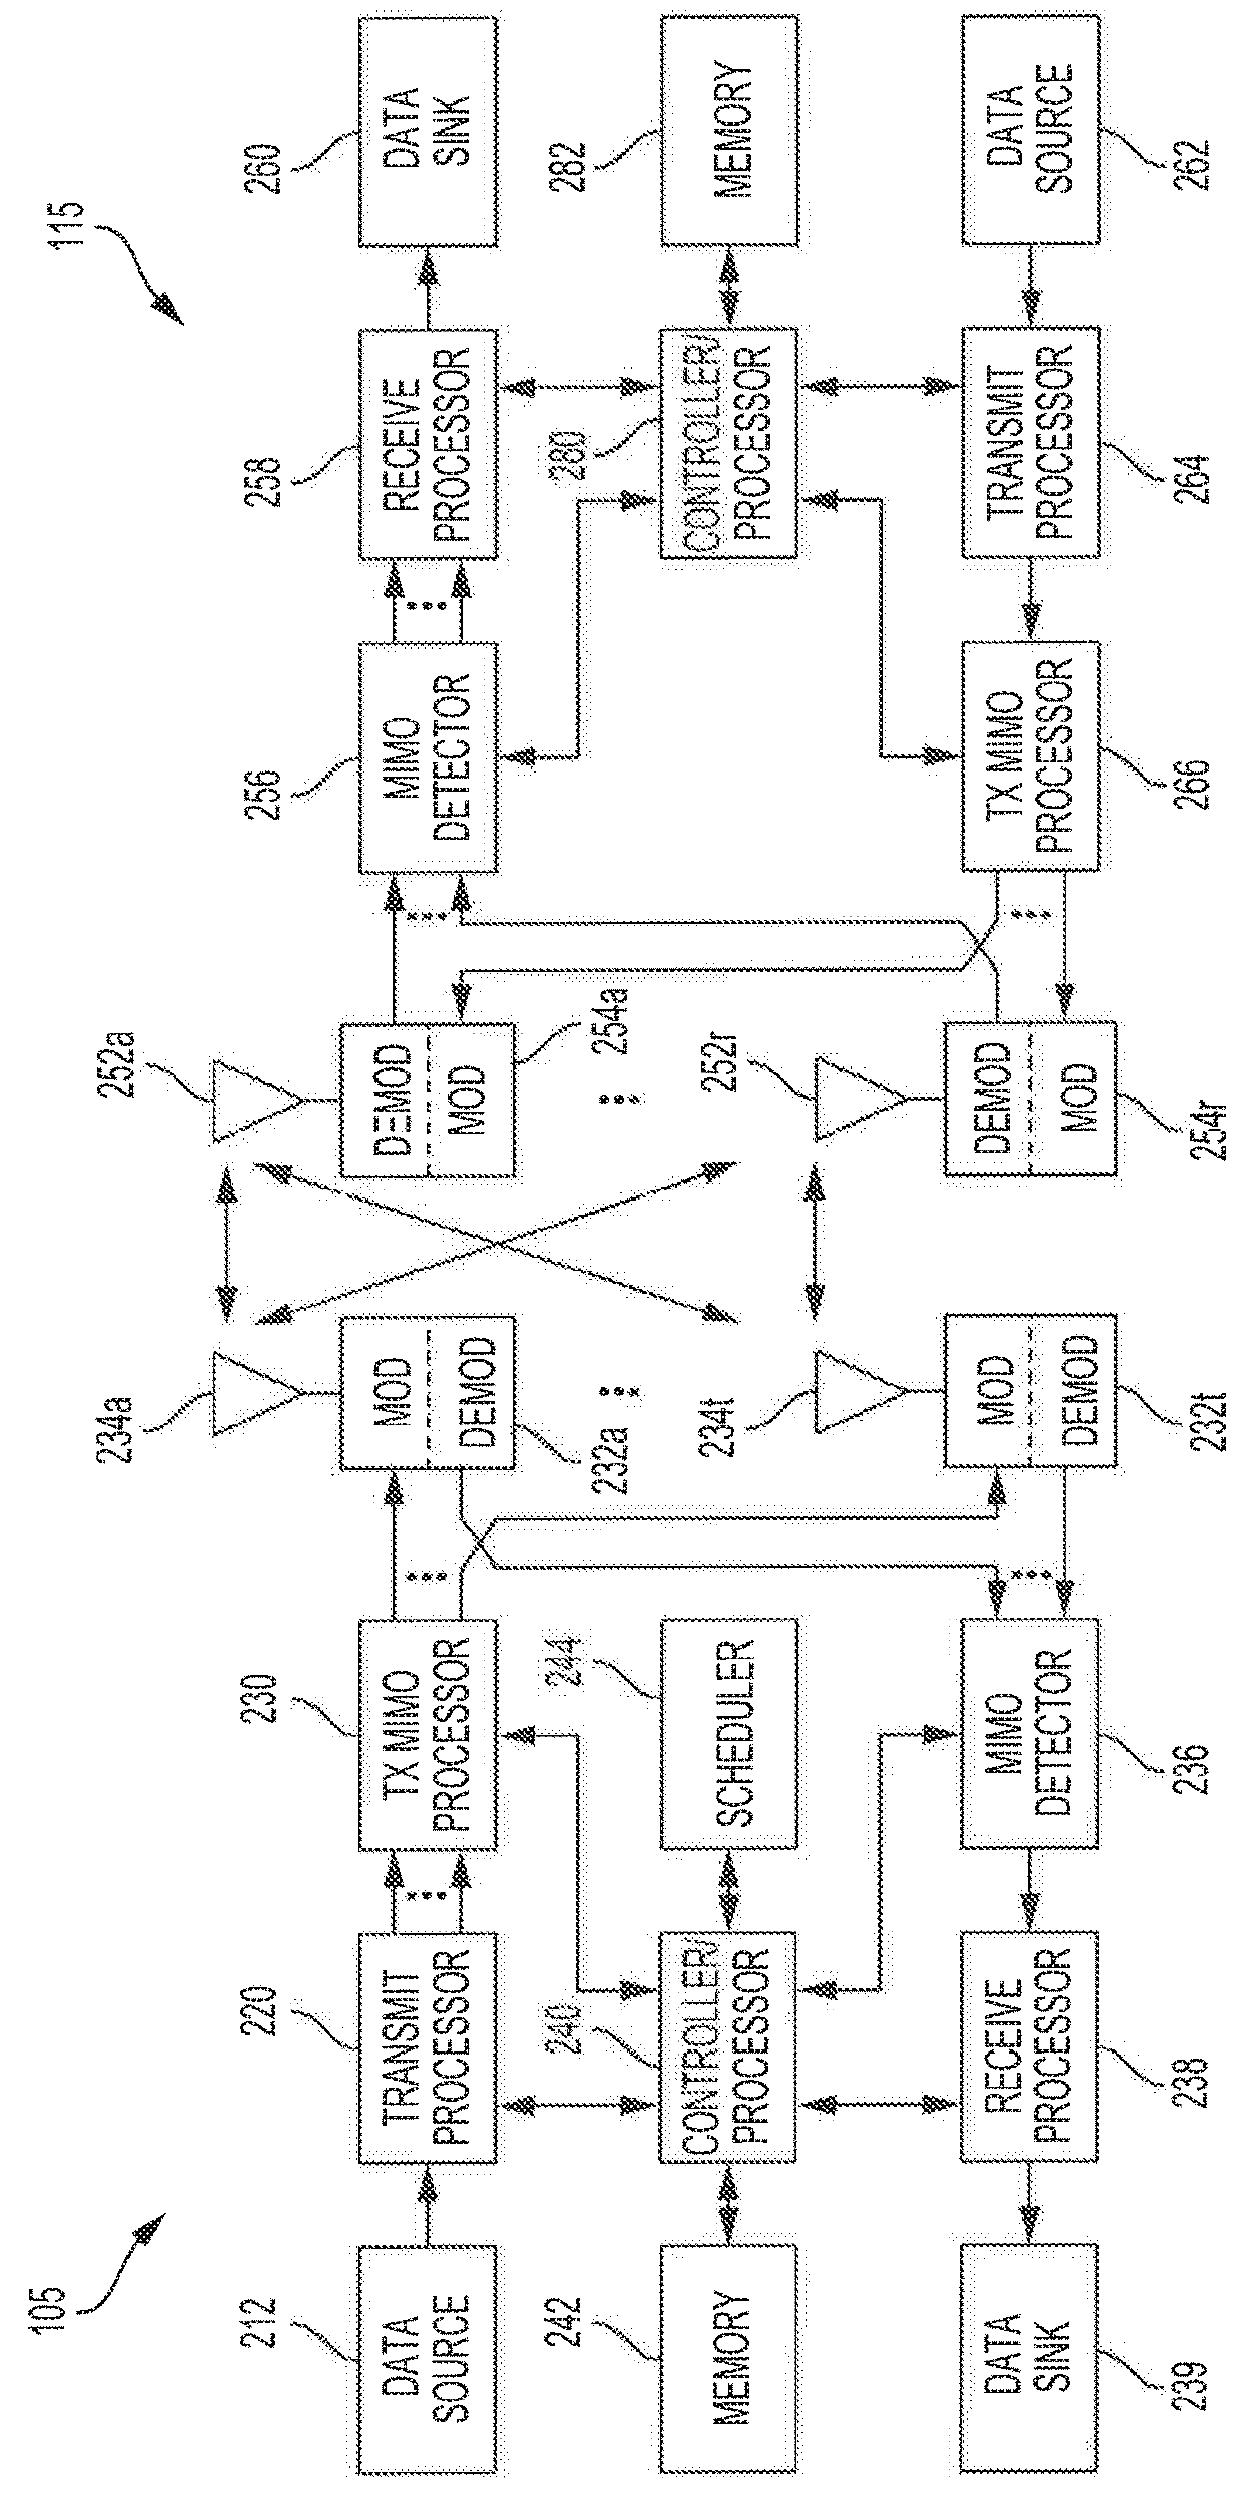 Methods for adapting beam scanning frequencies in millimeter wave systems